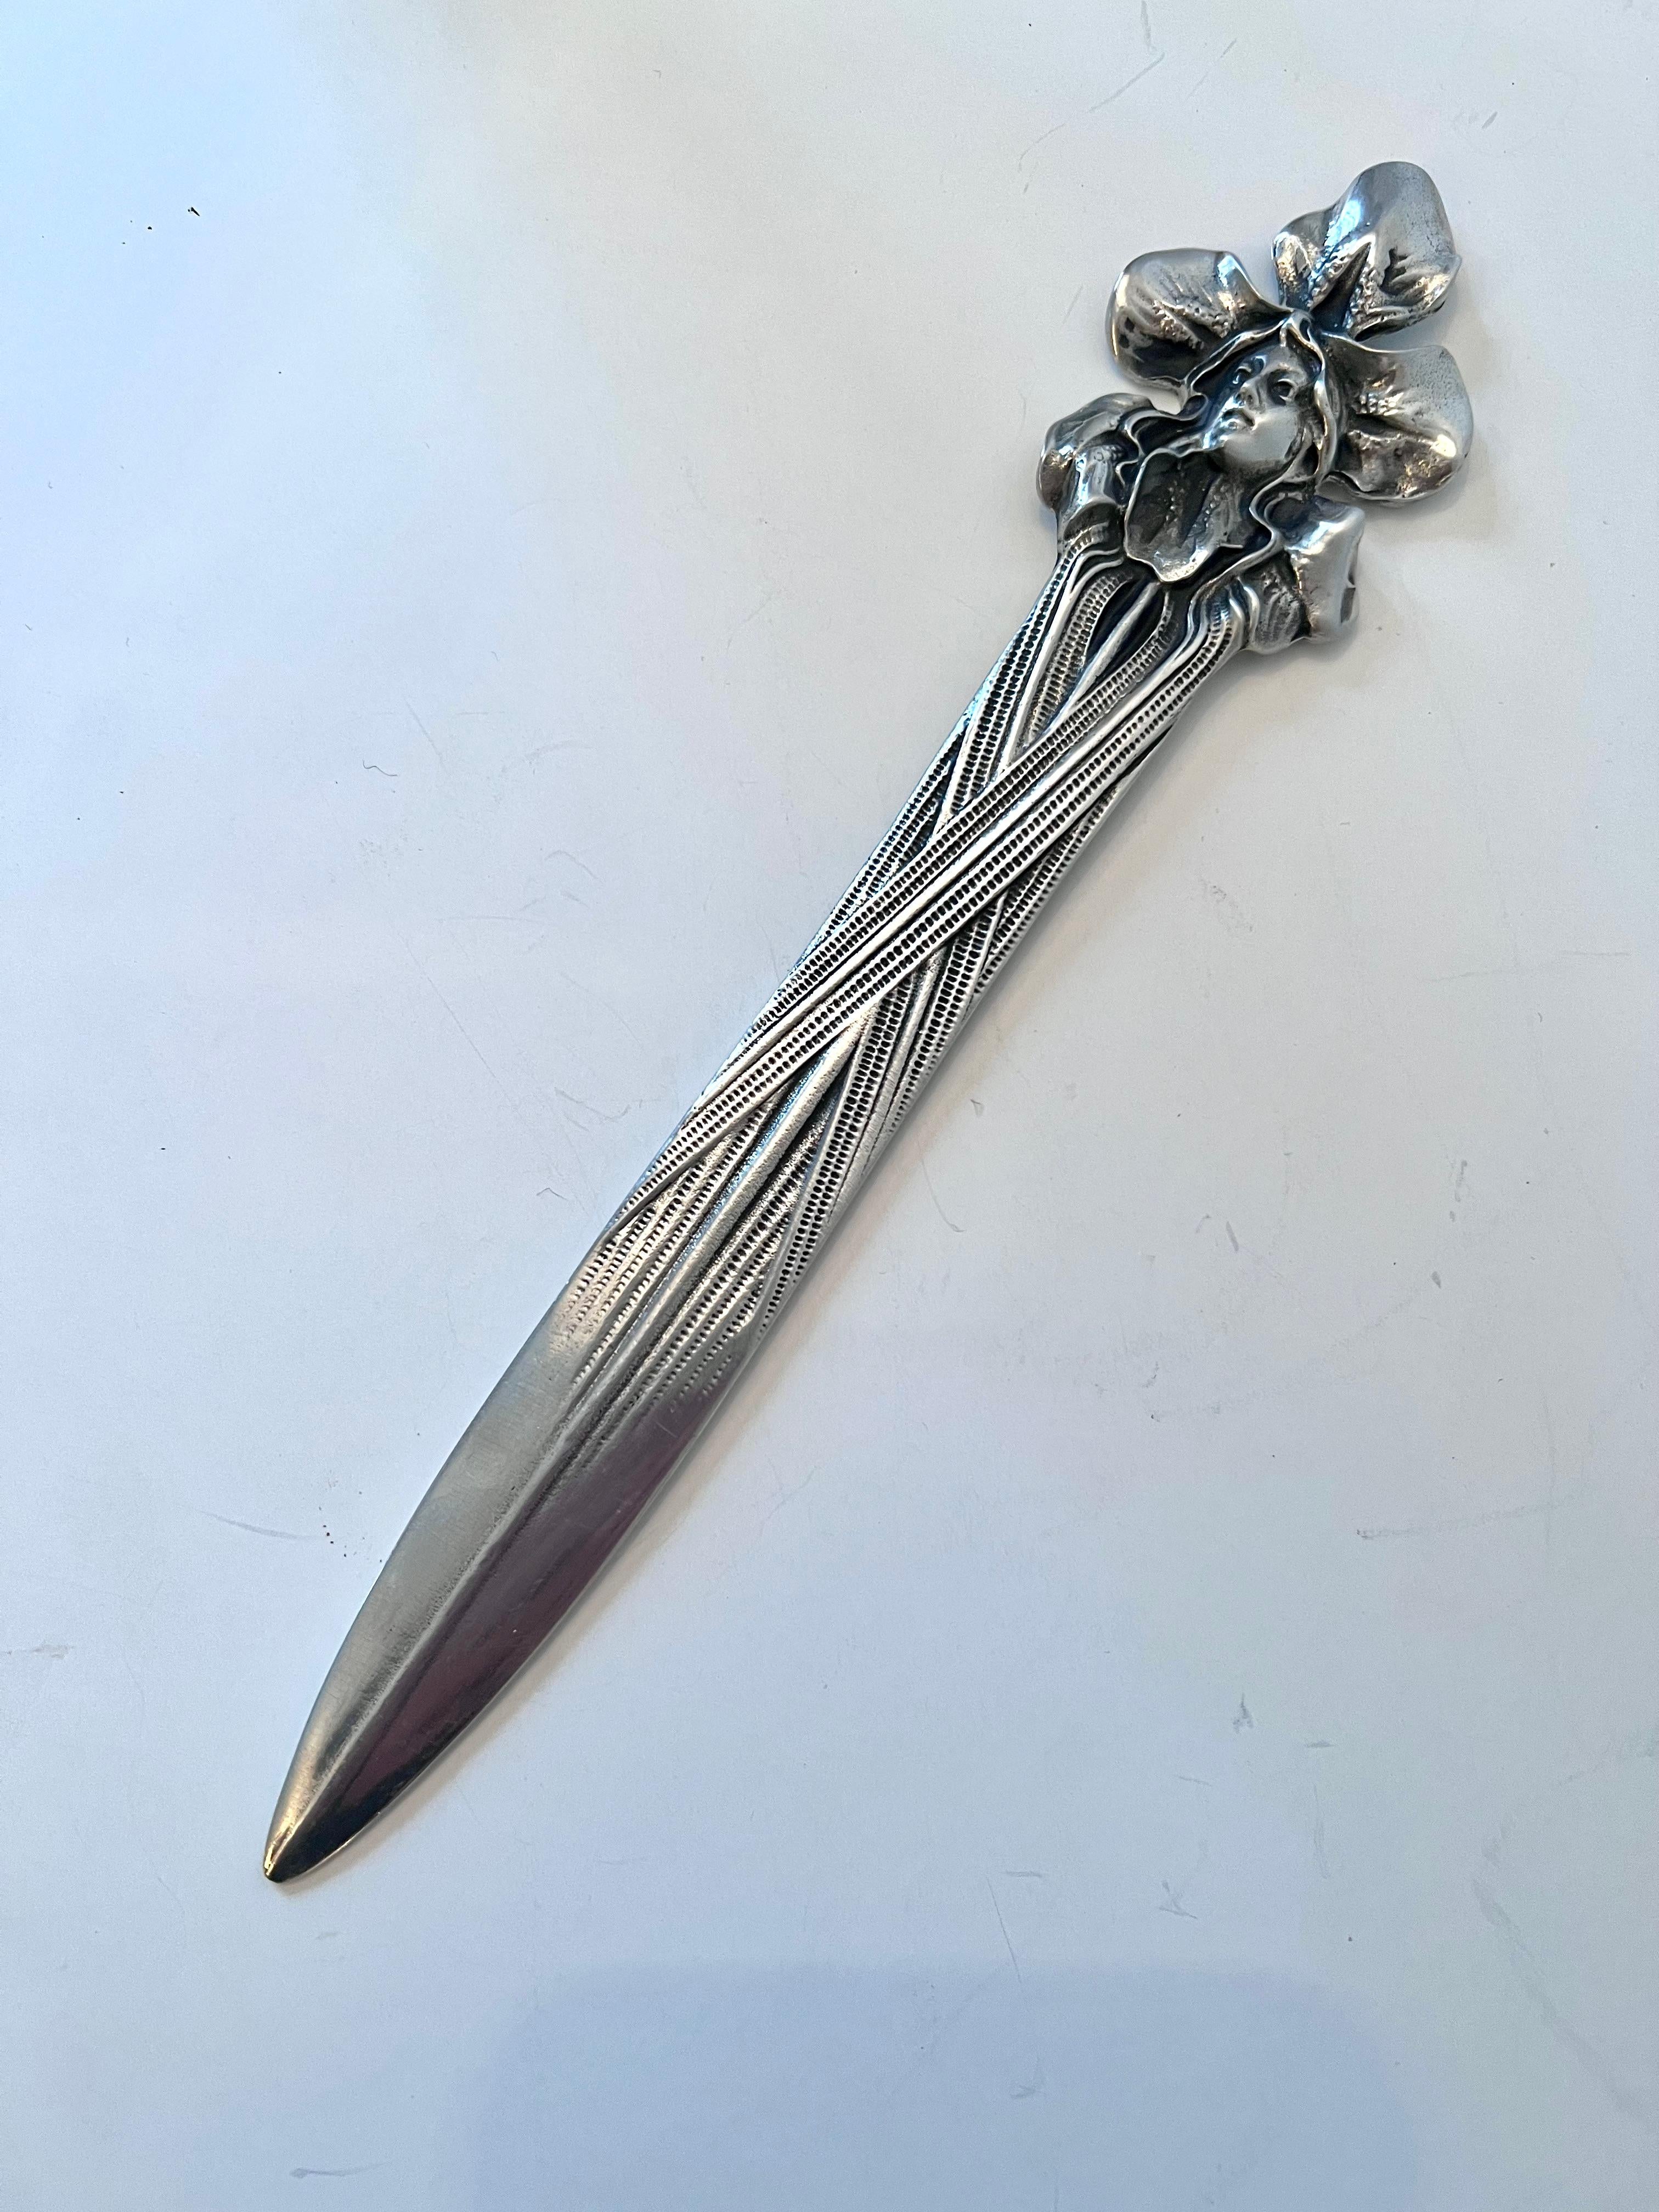 A large and solid silver pewter art nouveau letter opener featuring a lady - a wonderful decorative piece for any desk or work station.